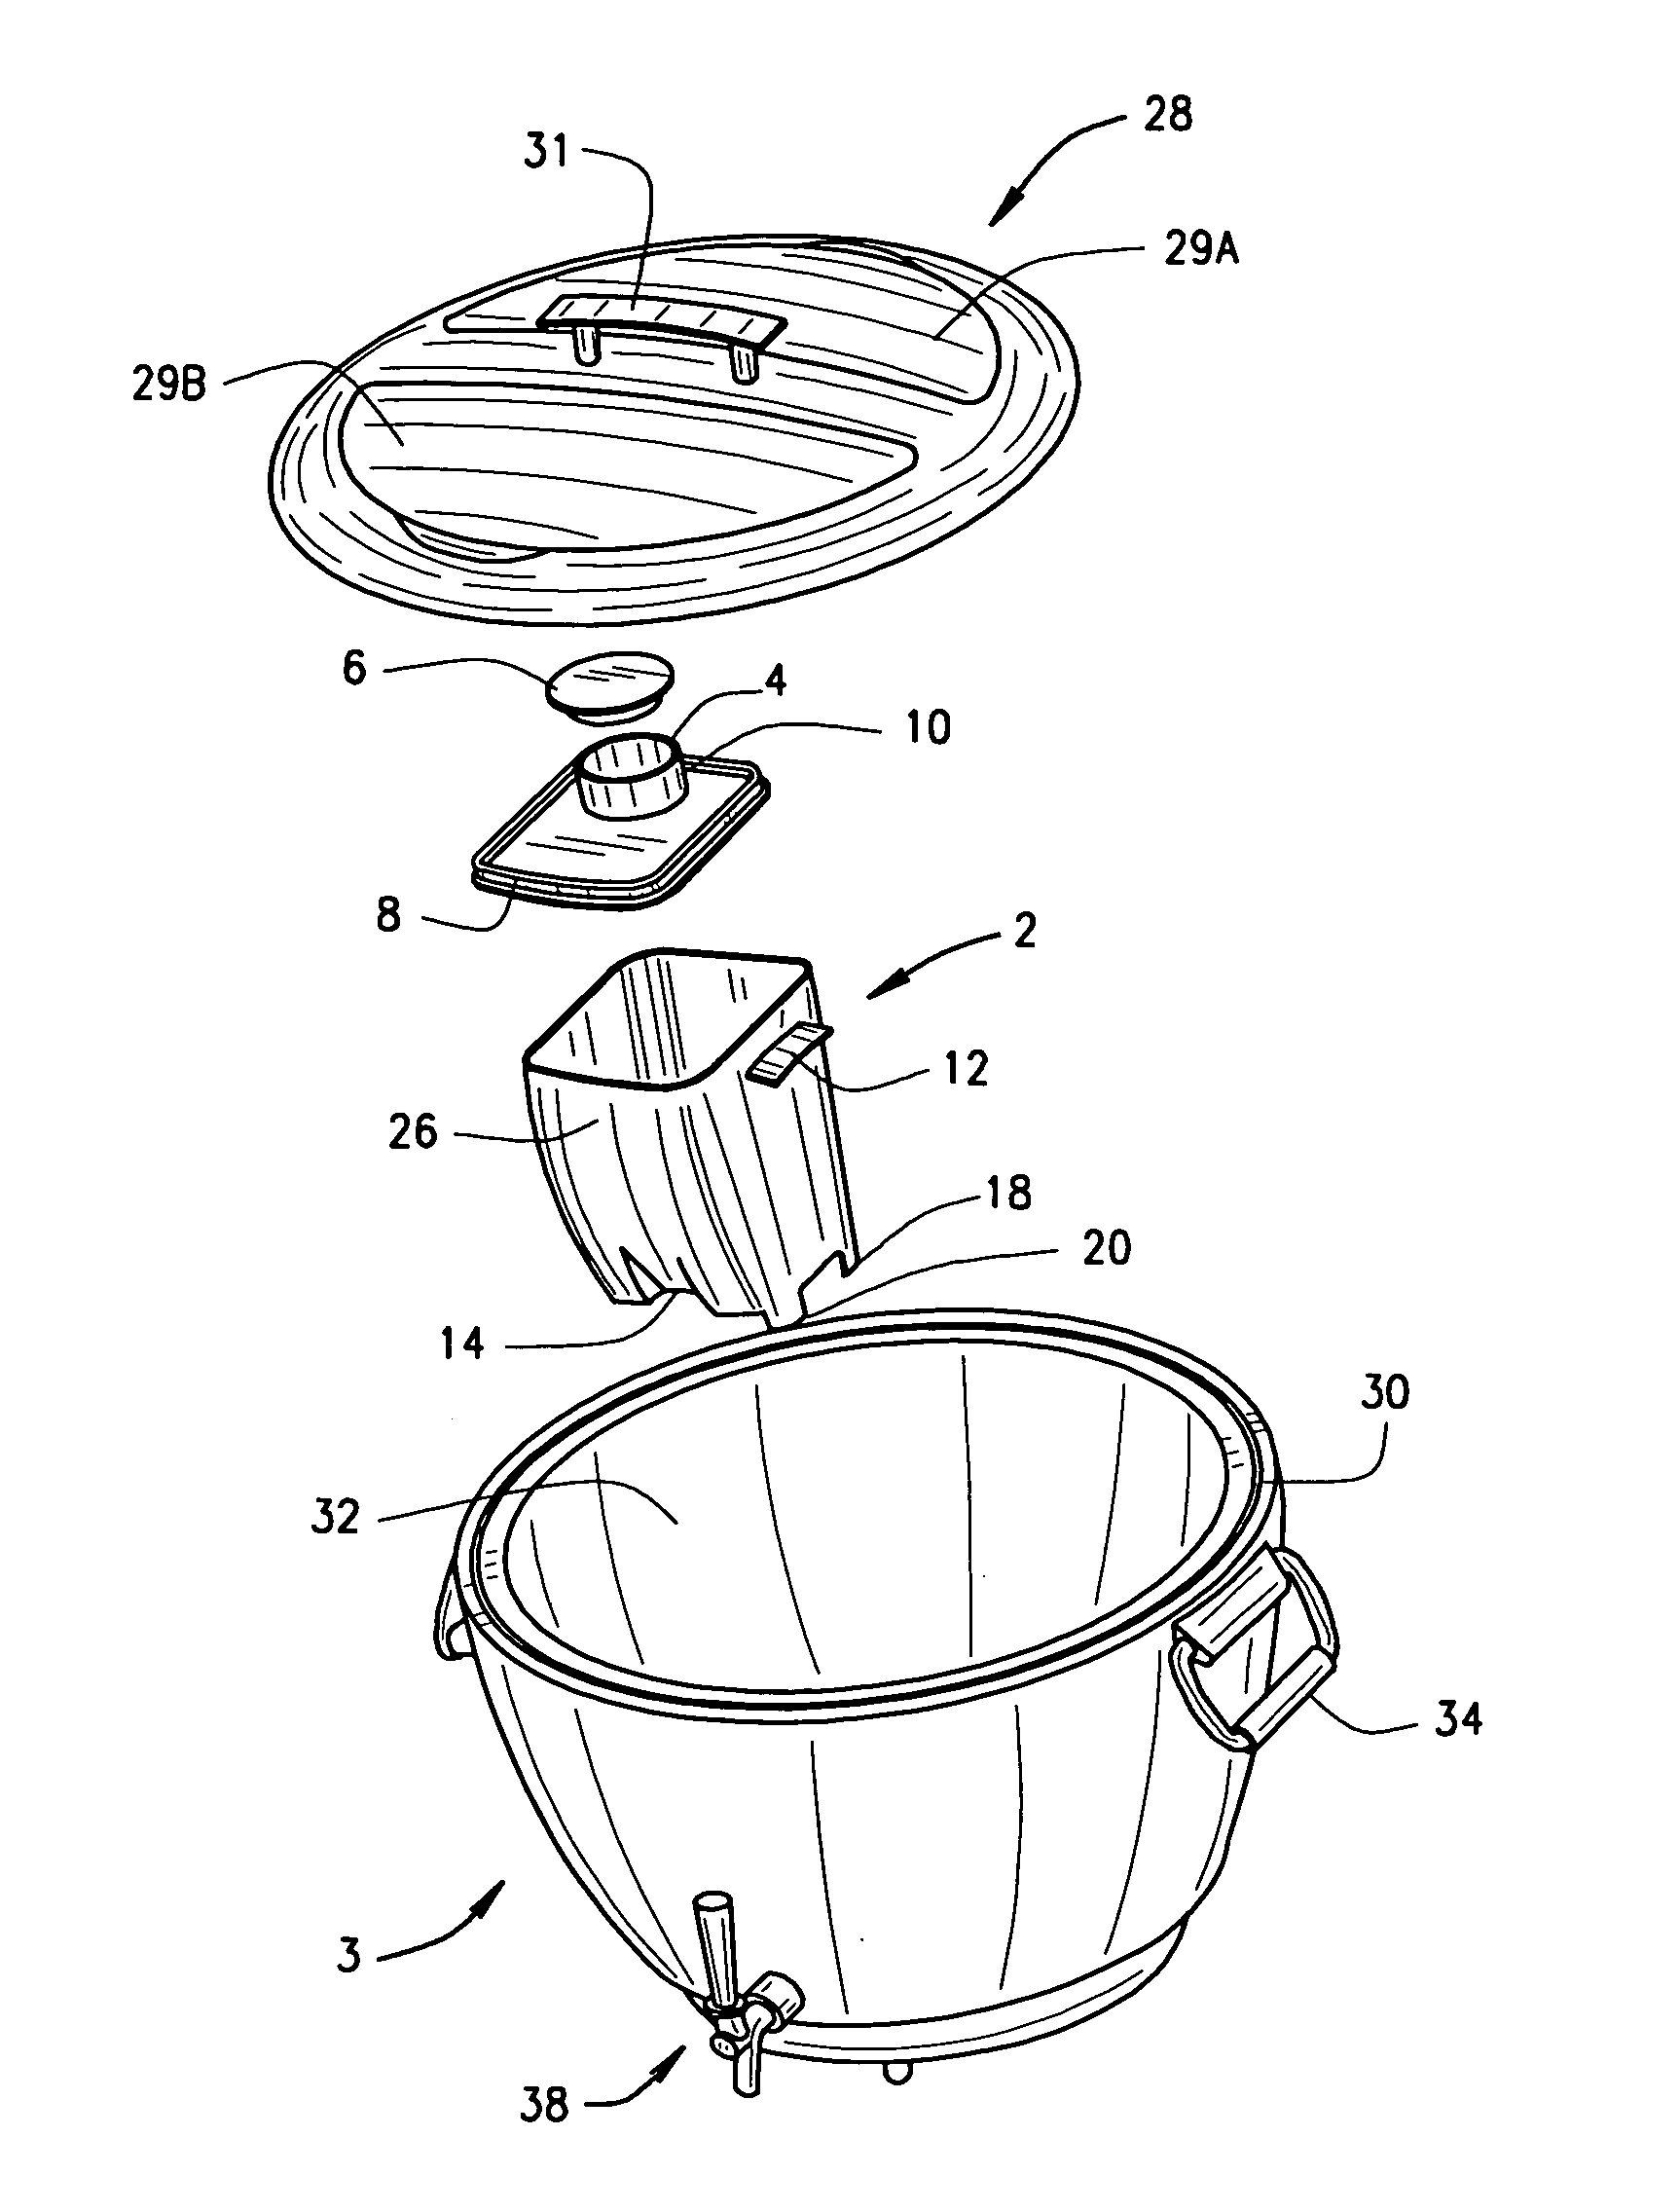 Beverage cooling and dispensing unit